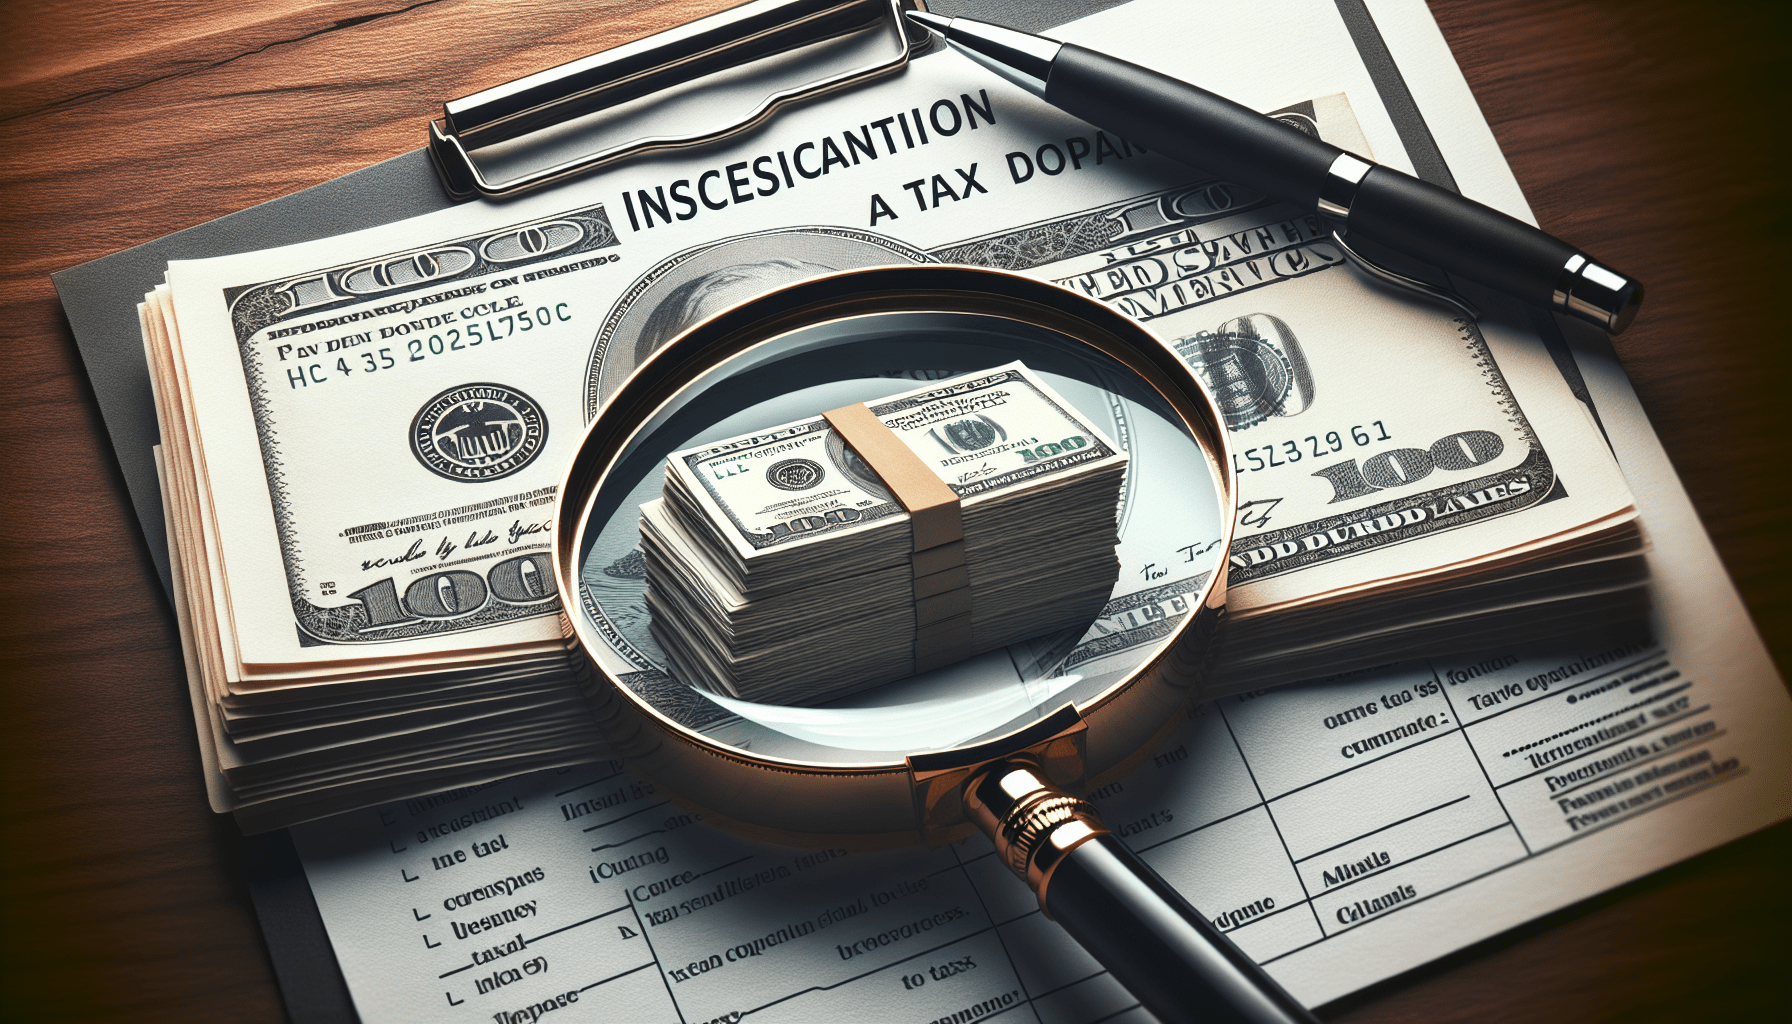 What Taxes Does An LLC Pay To IRS?